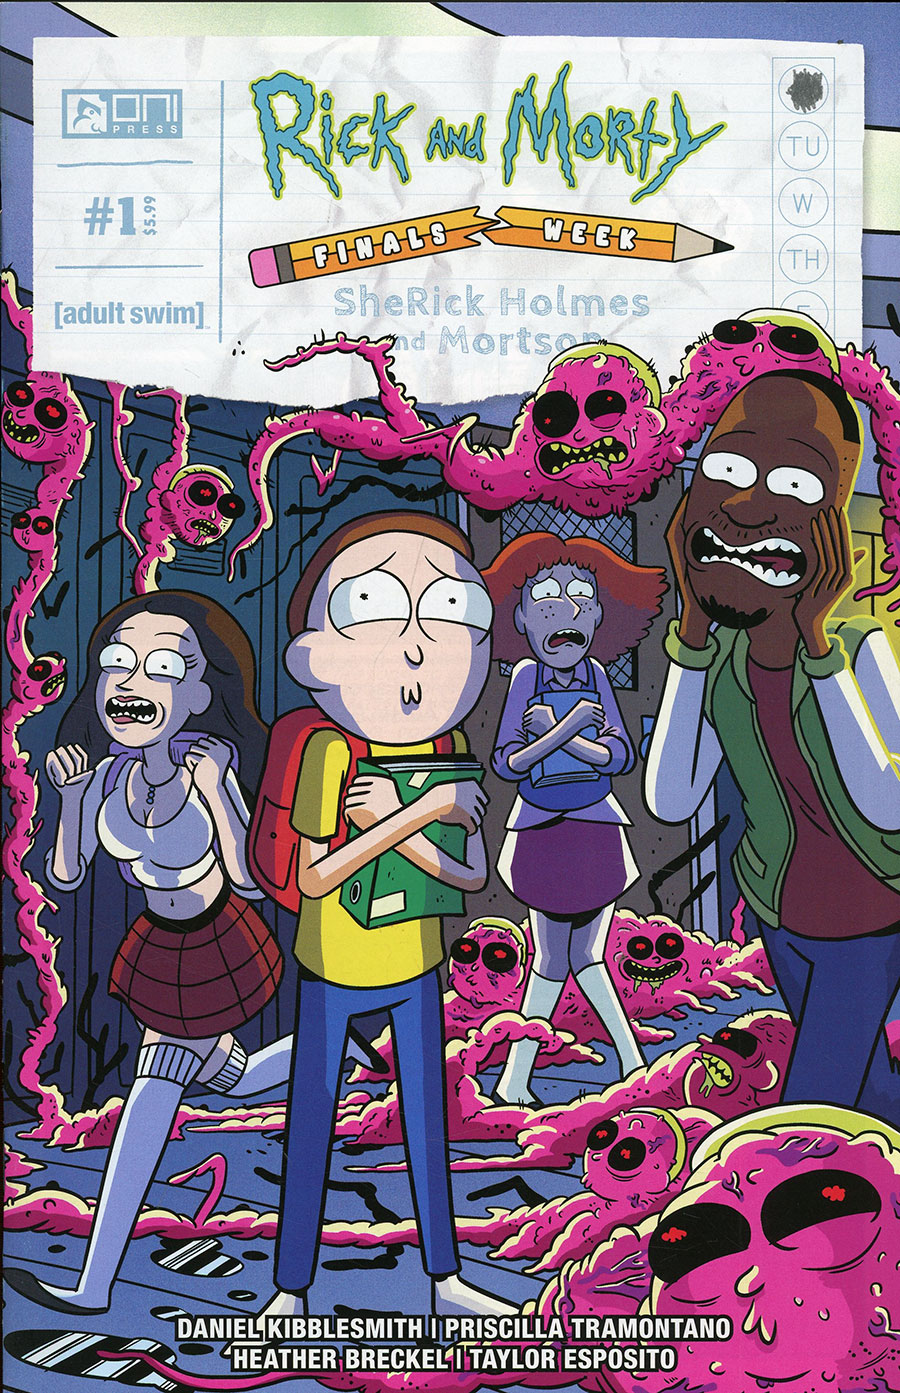 Rick And Morty Finals Week Sherick Holmes And Mortson #1 Cover C Incentive Marc Ellerby Interlocking Variant Cover